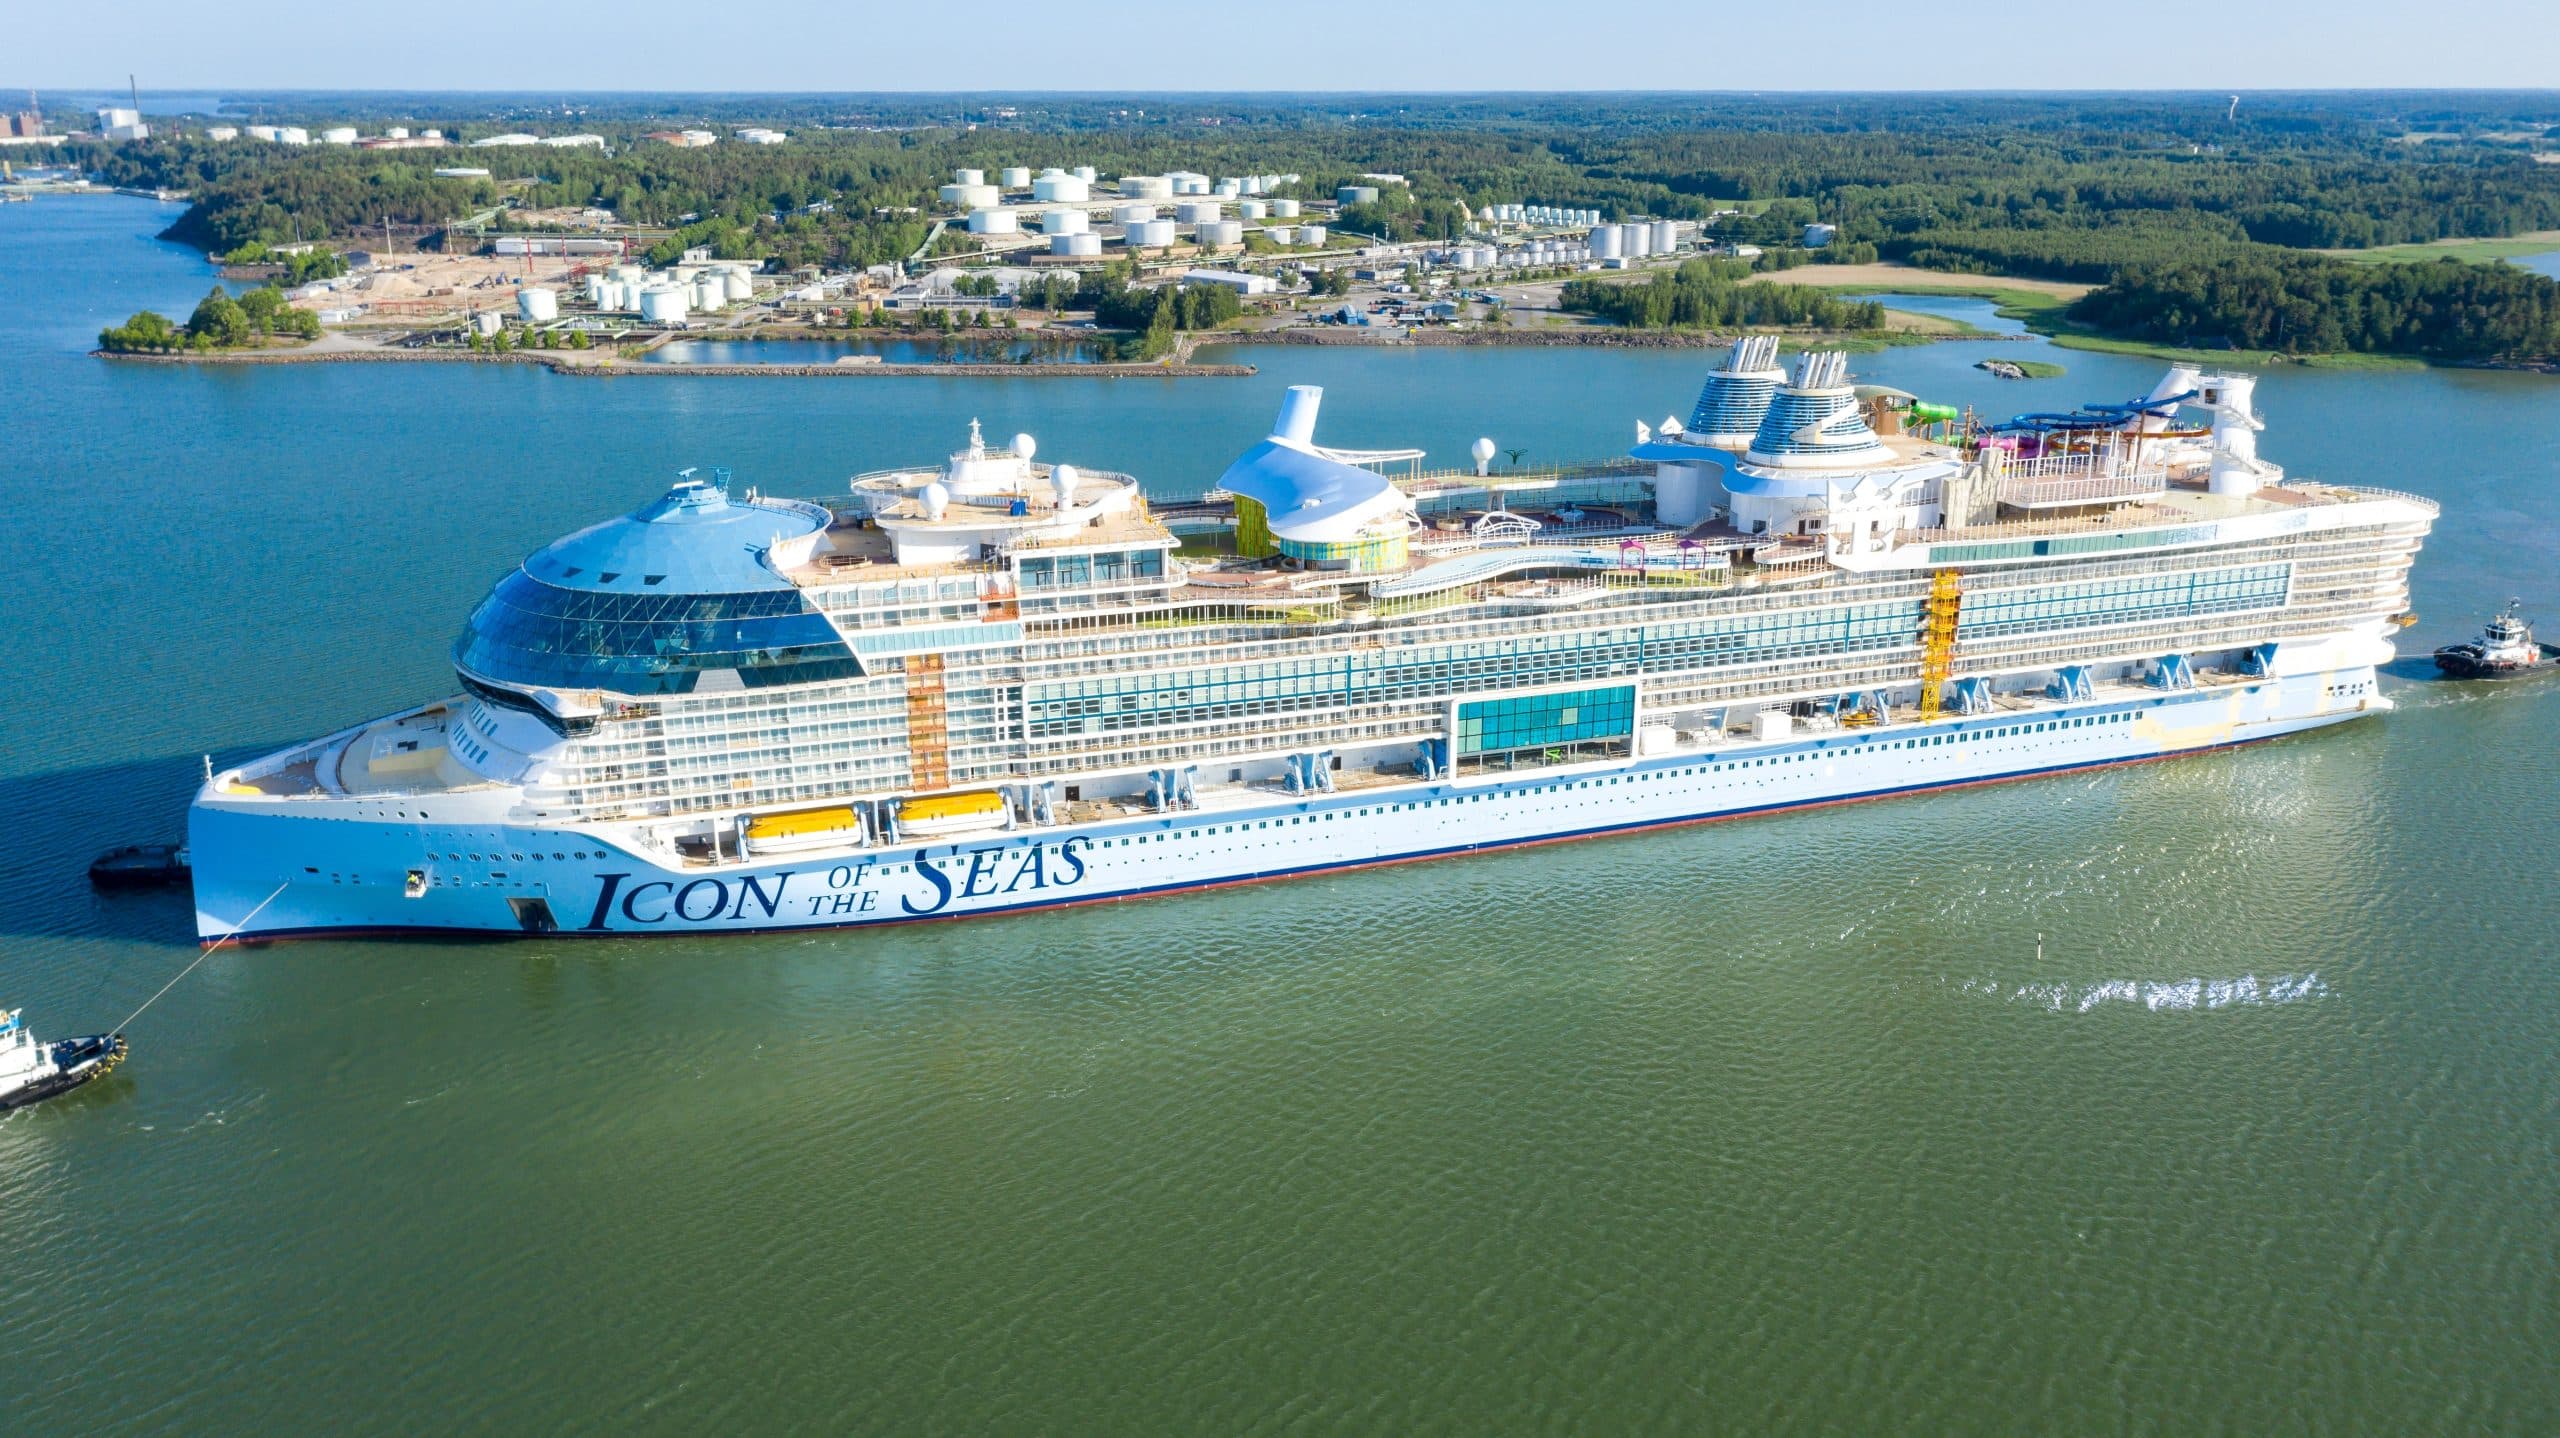 The World's Largest Cruise Ship, Icon Of The Seas, Will Arrive In Cozumel, Mexico, In February